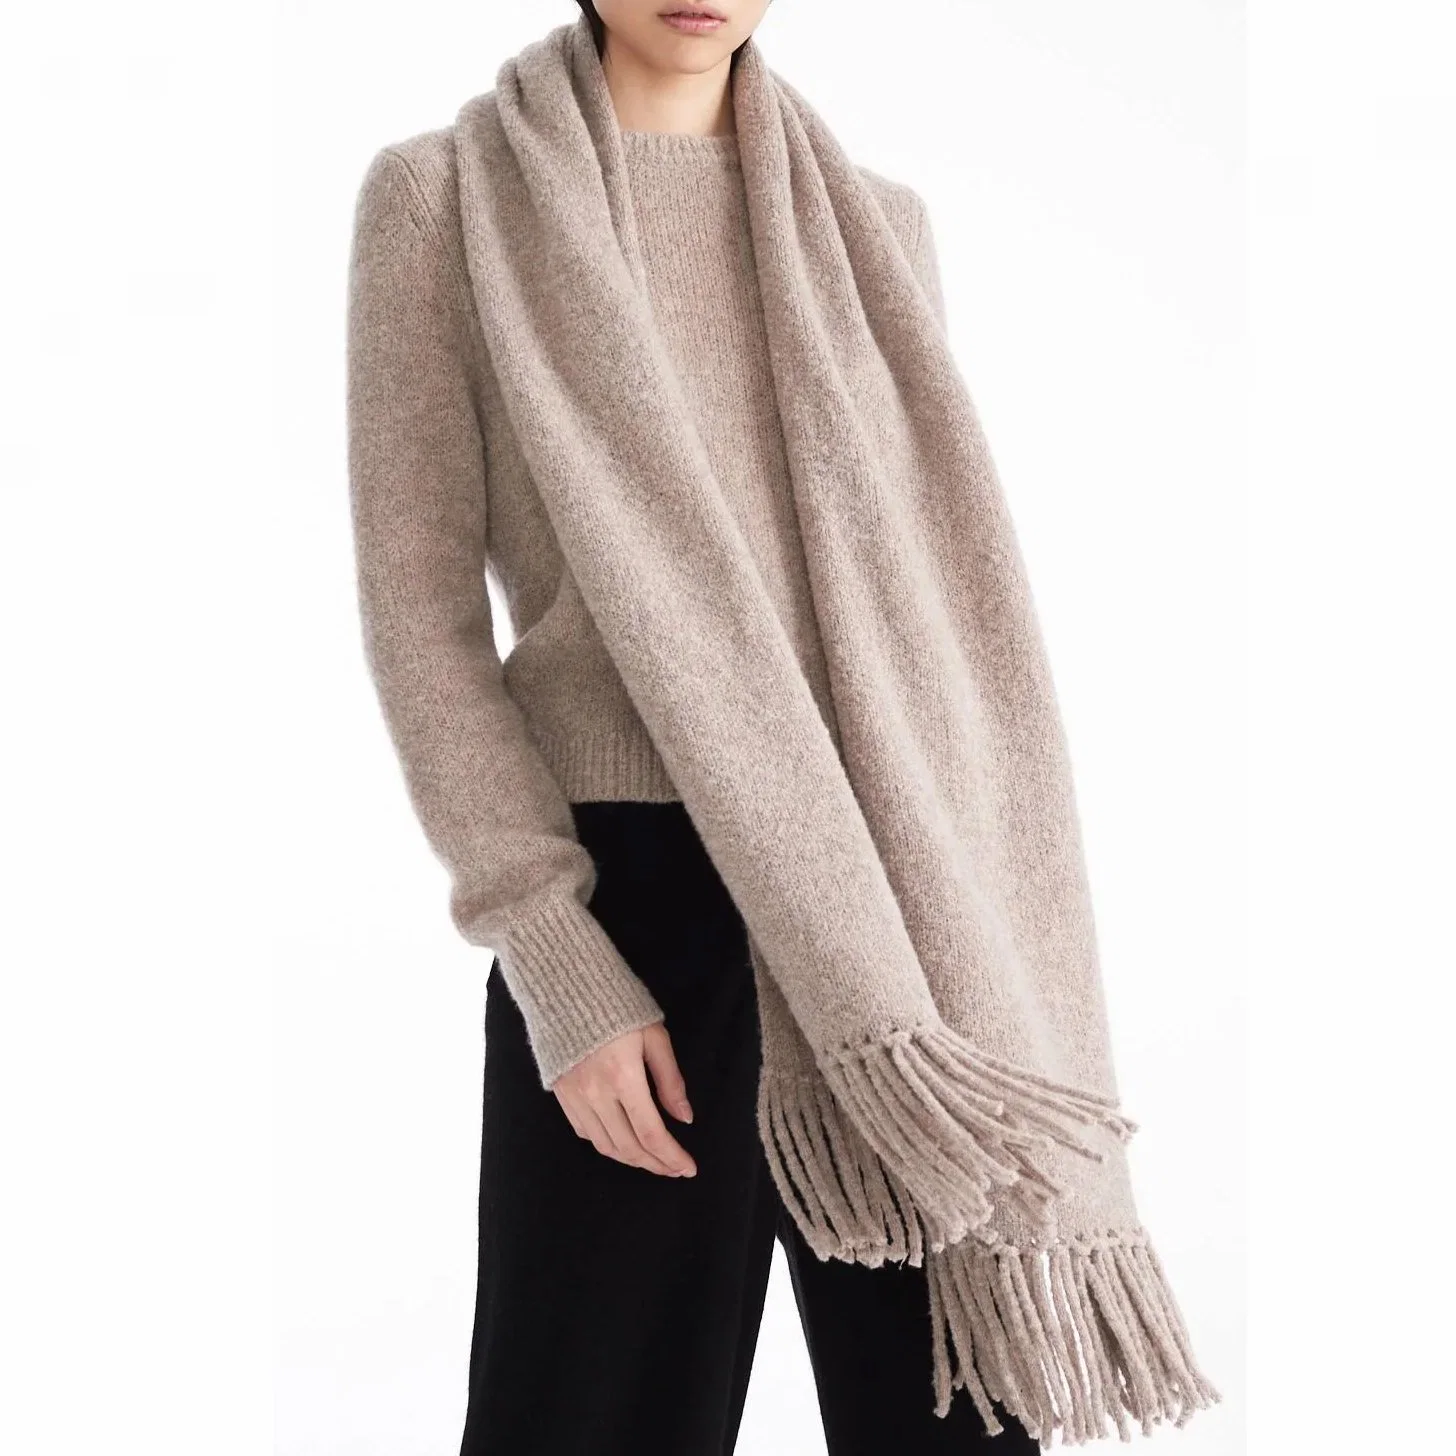 Pure Cashmere Knitted Ladies Fashion Winter Apparel Accessories Scarf with Fringe